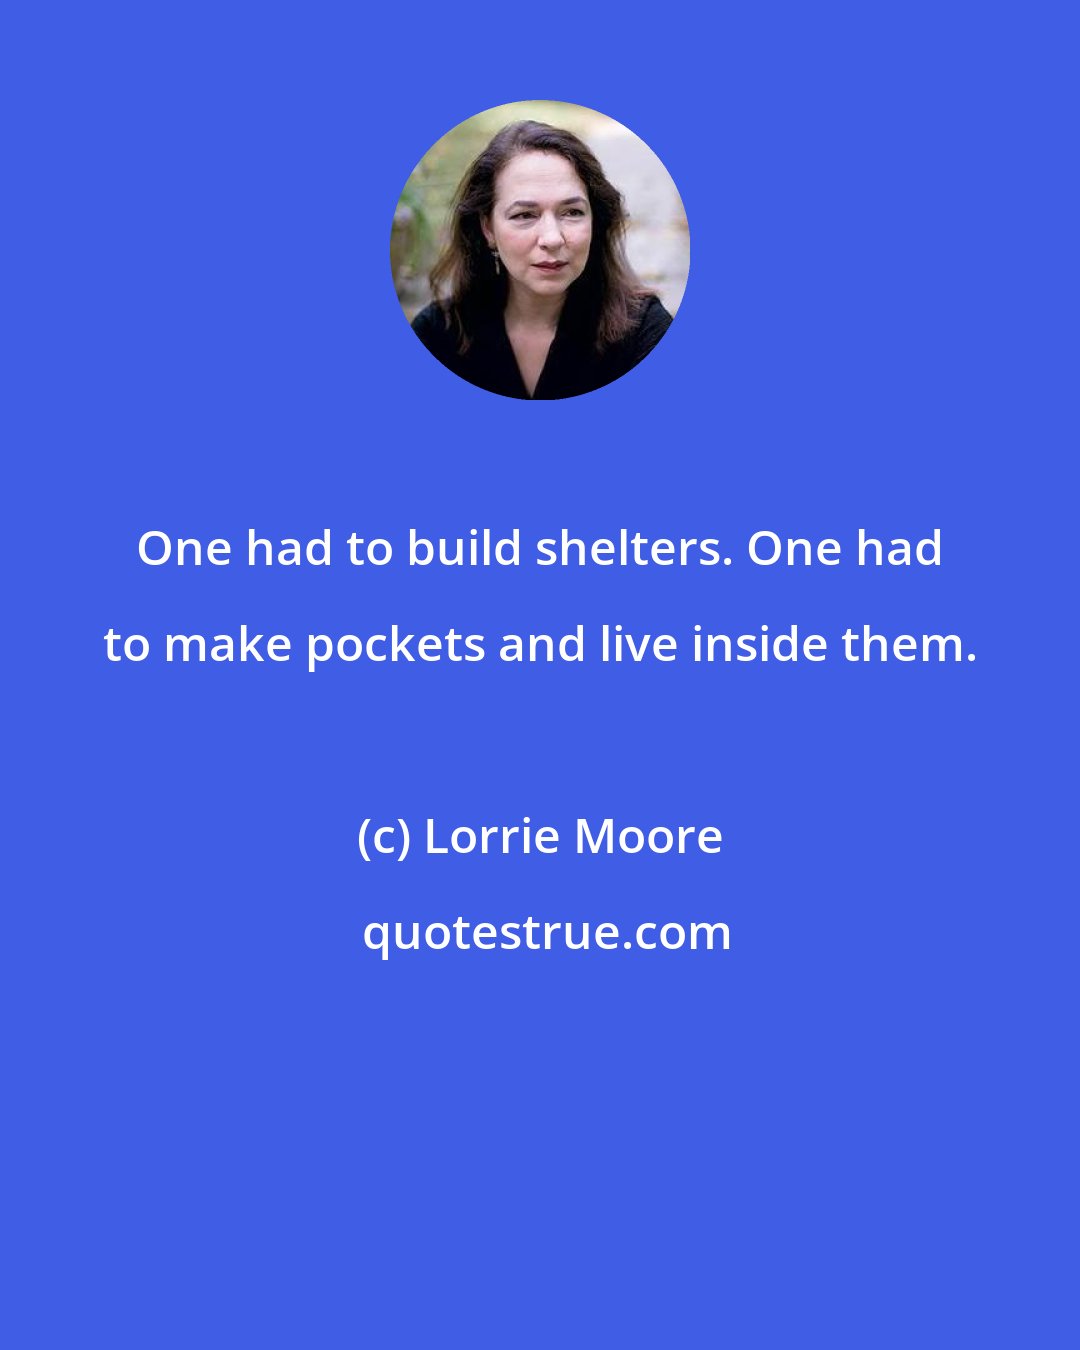 Lorrie Moore: One had to build shelters. One had to make pockets and live inside them.